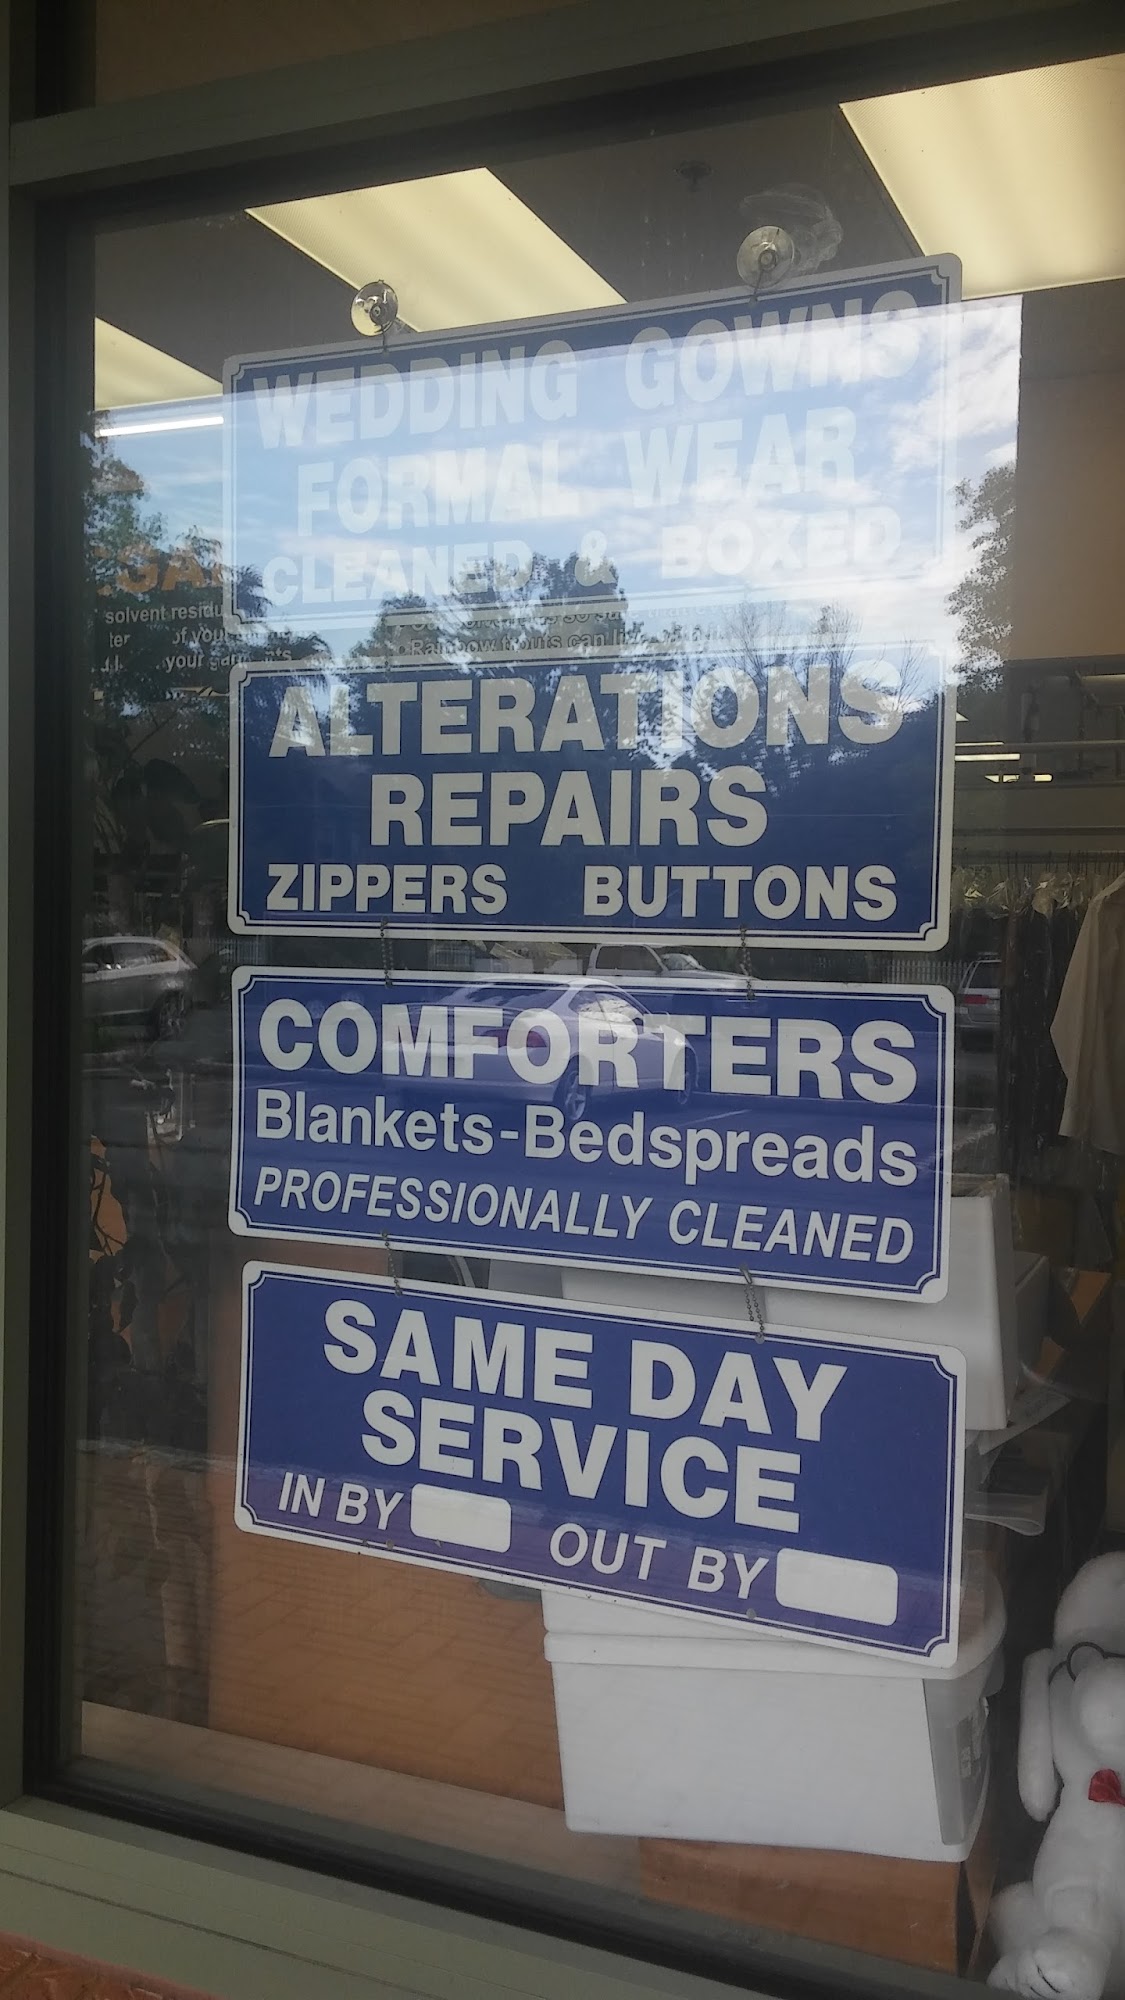 Spotless Cleaners 430 Main St, Spotswood New Jersey 08884